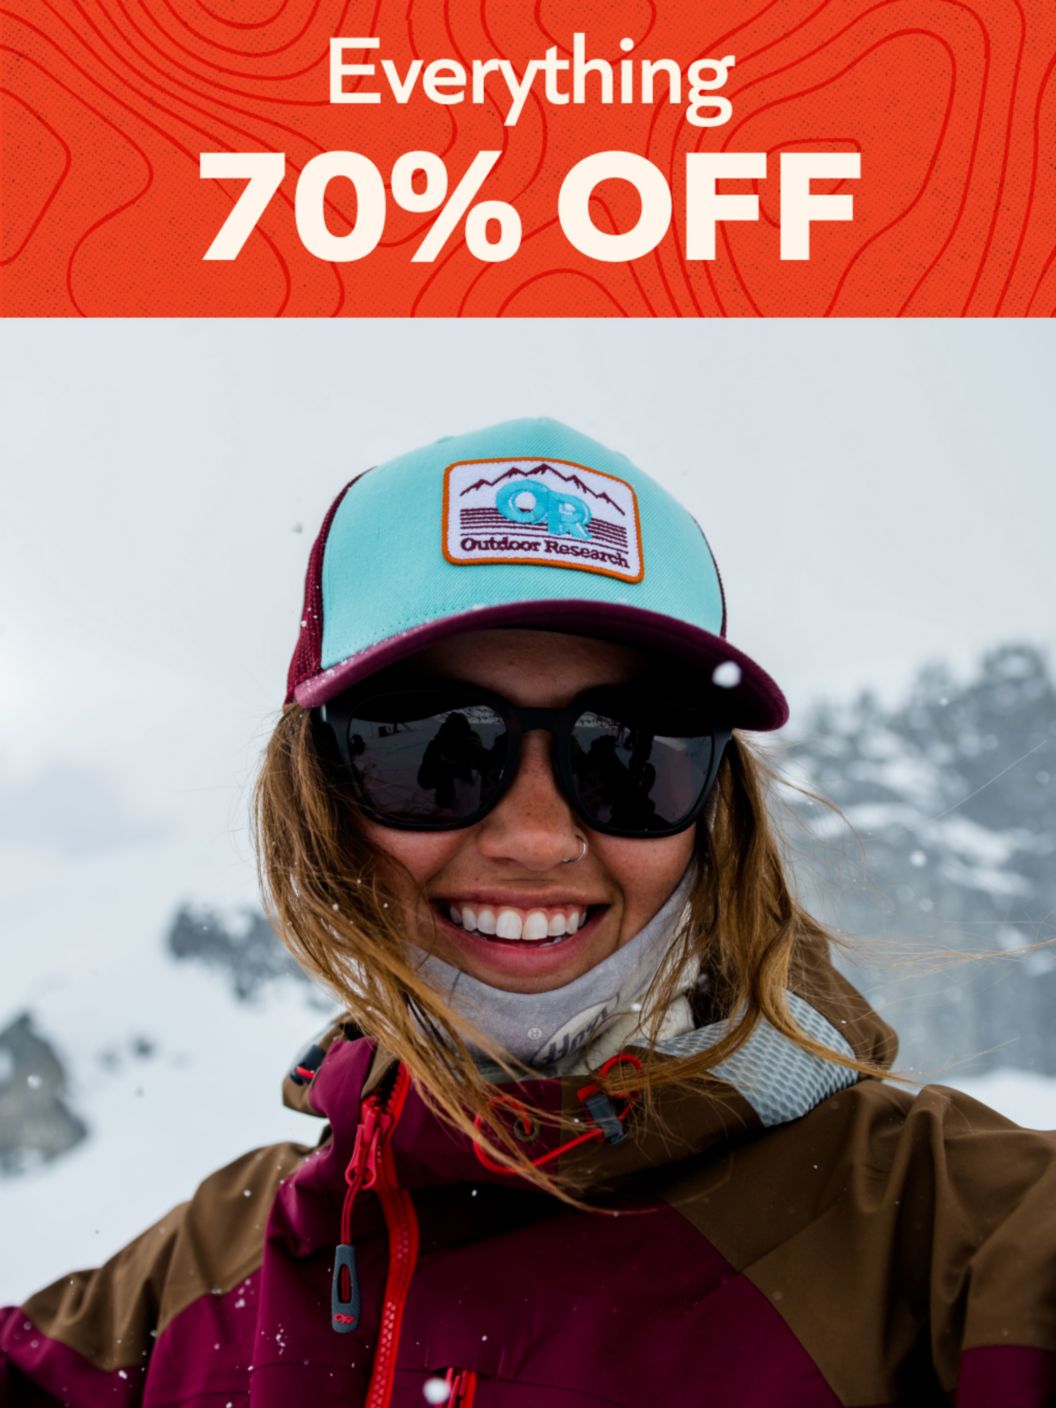 All Items 70% Off Or More.